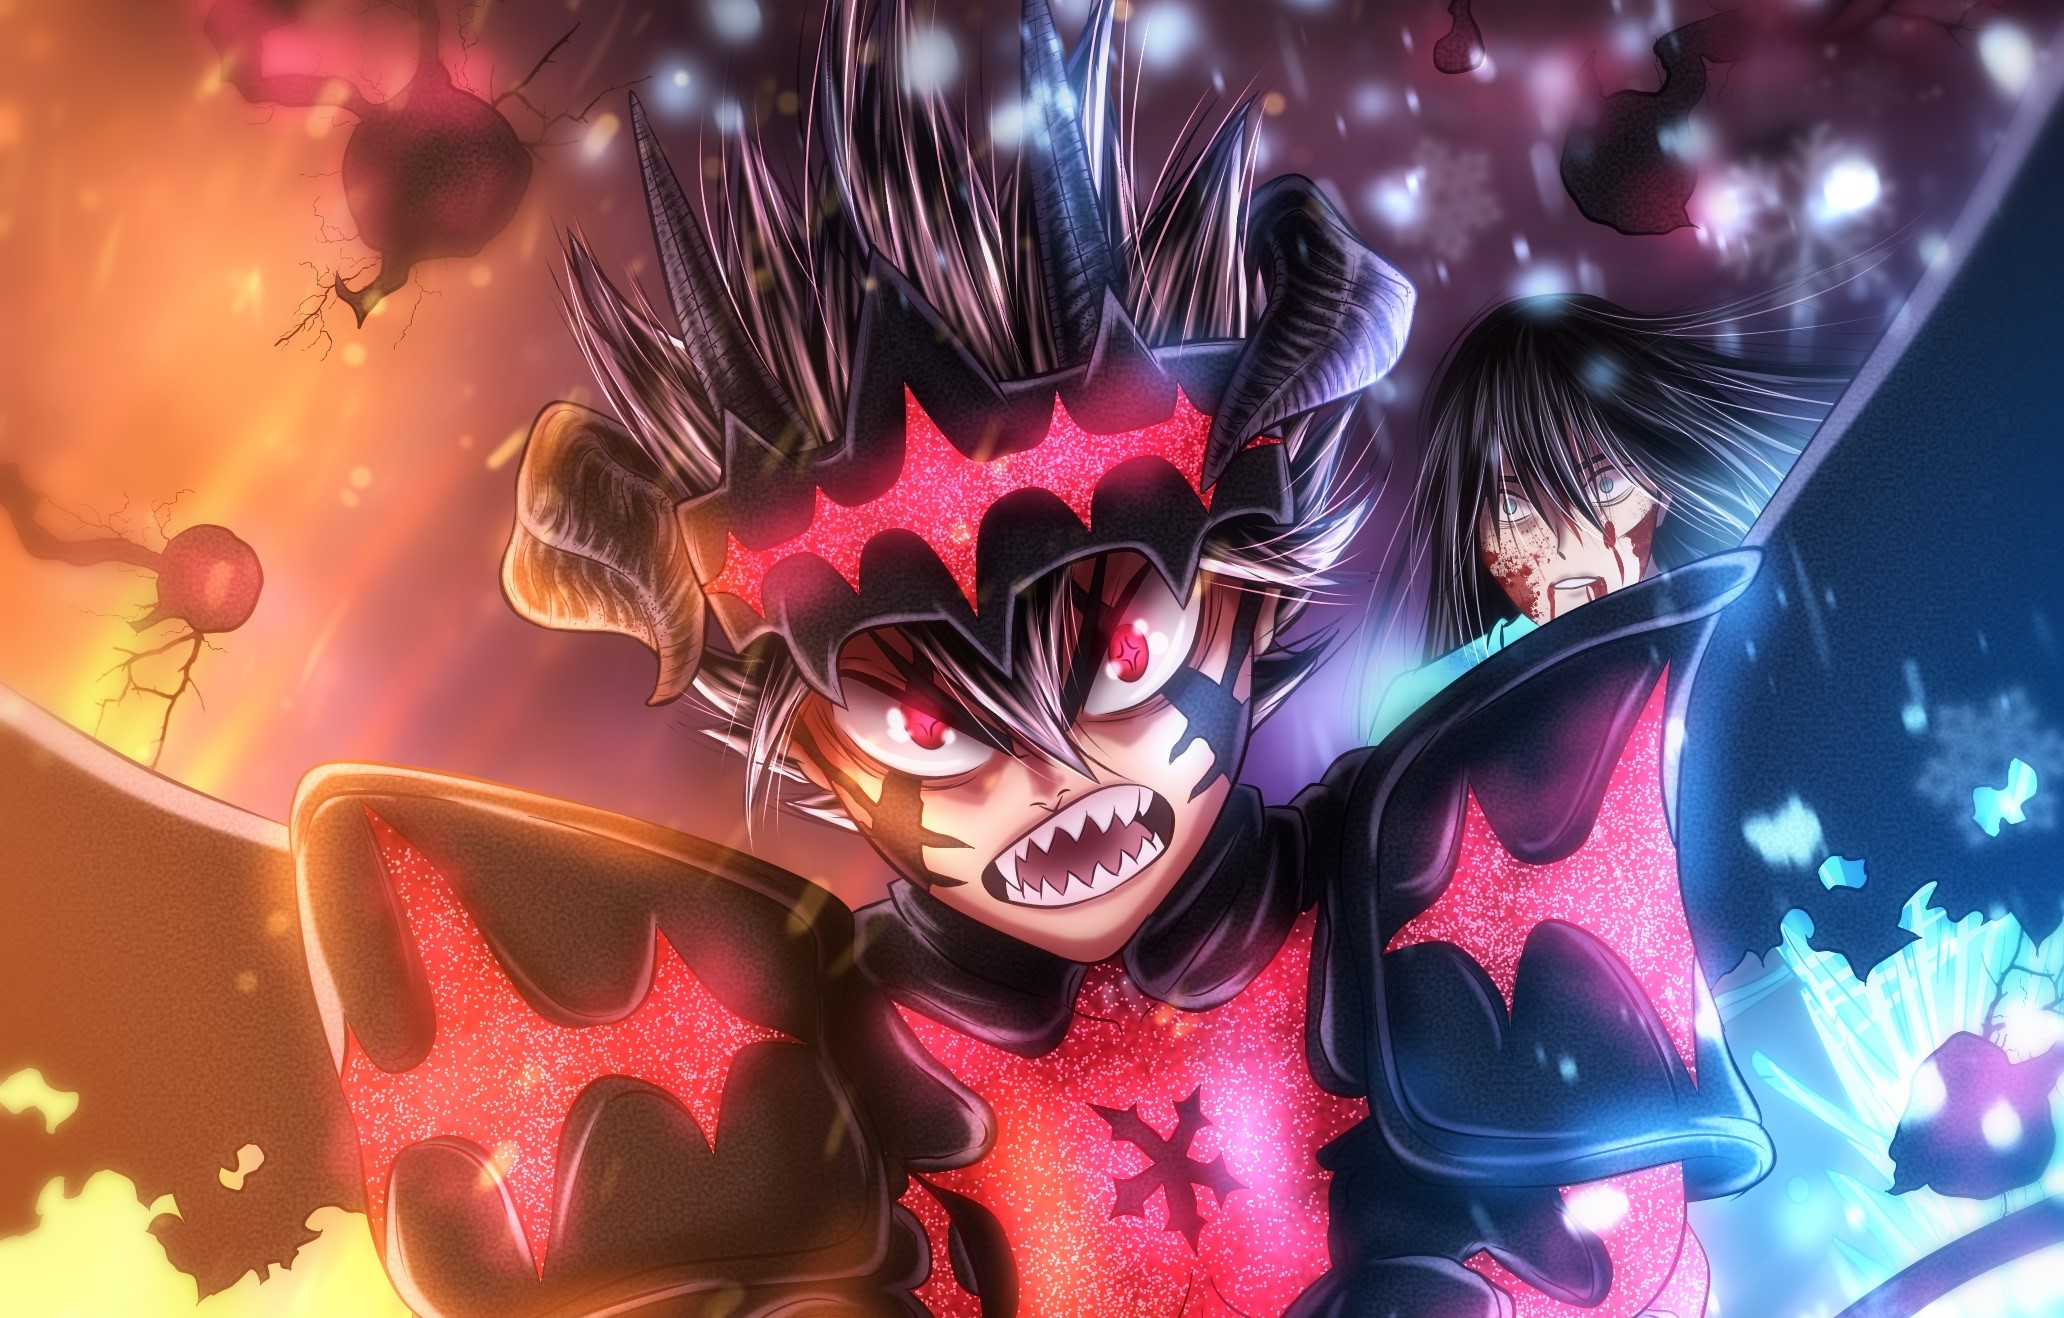 Asta (Black Clover) wallpapers for desktop, download free Asta (Black  Clover) pictures and backgrounds for PC